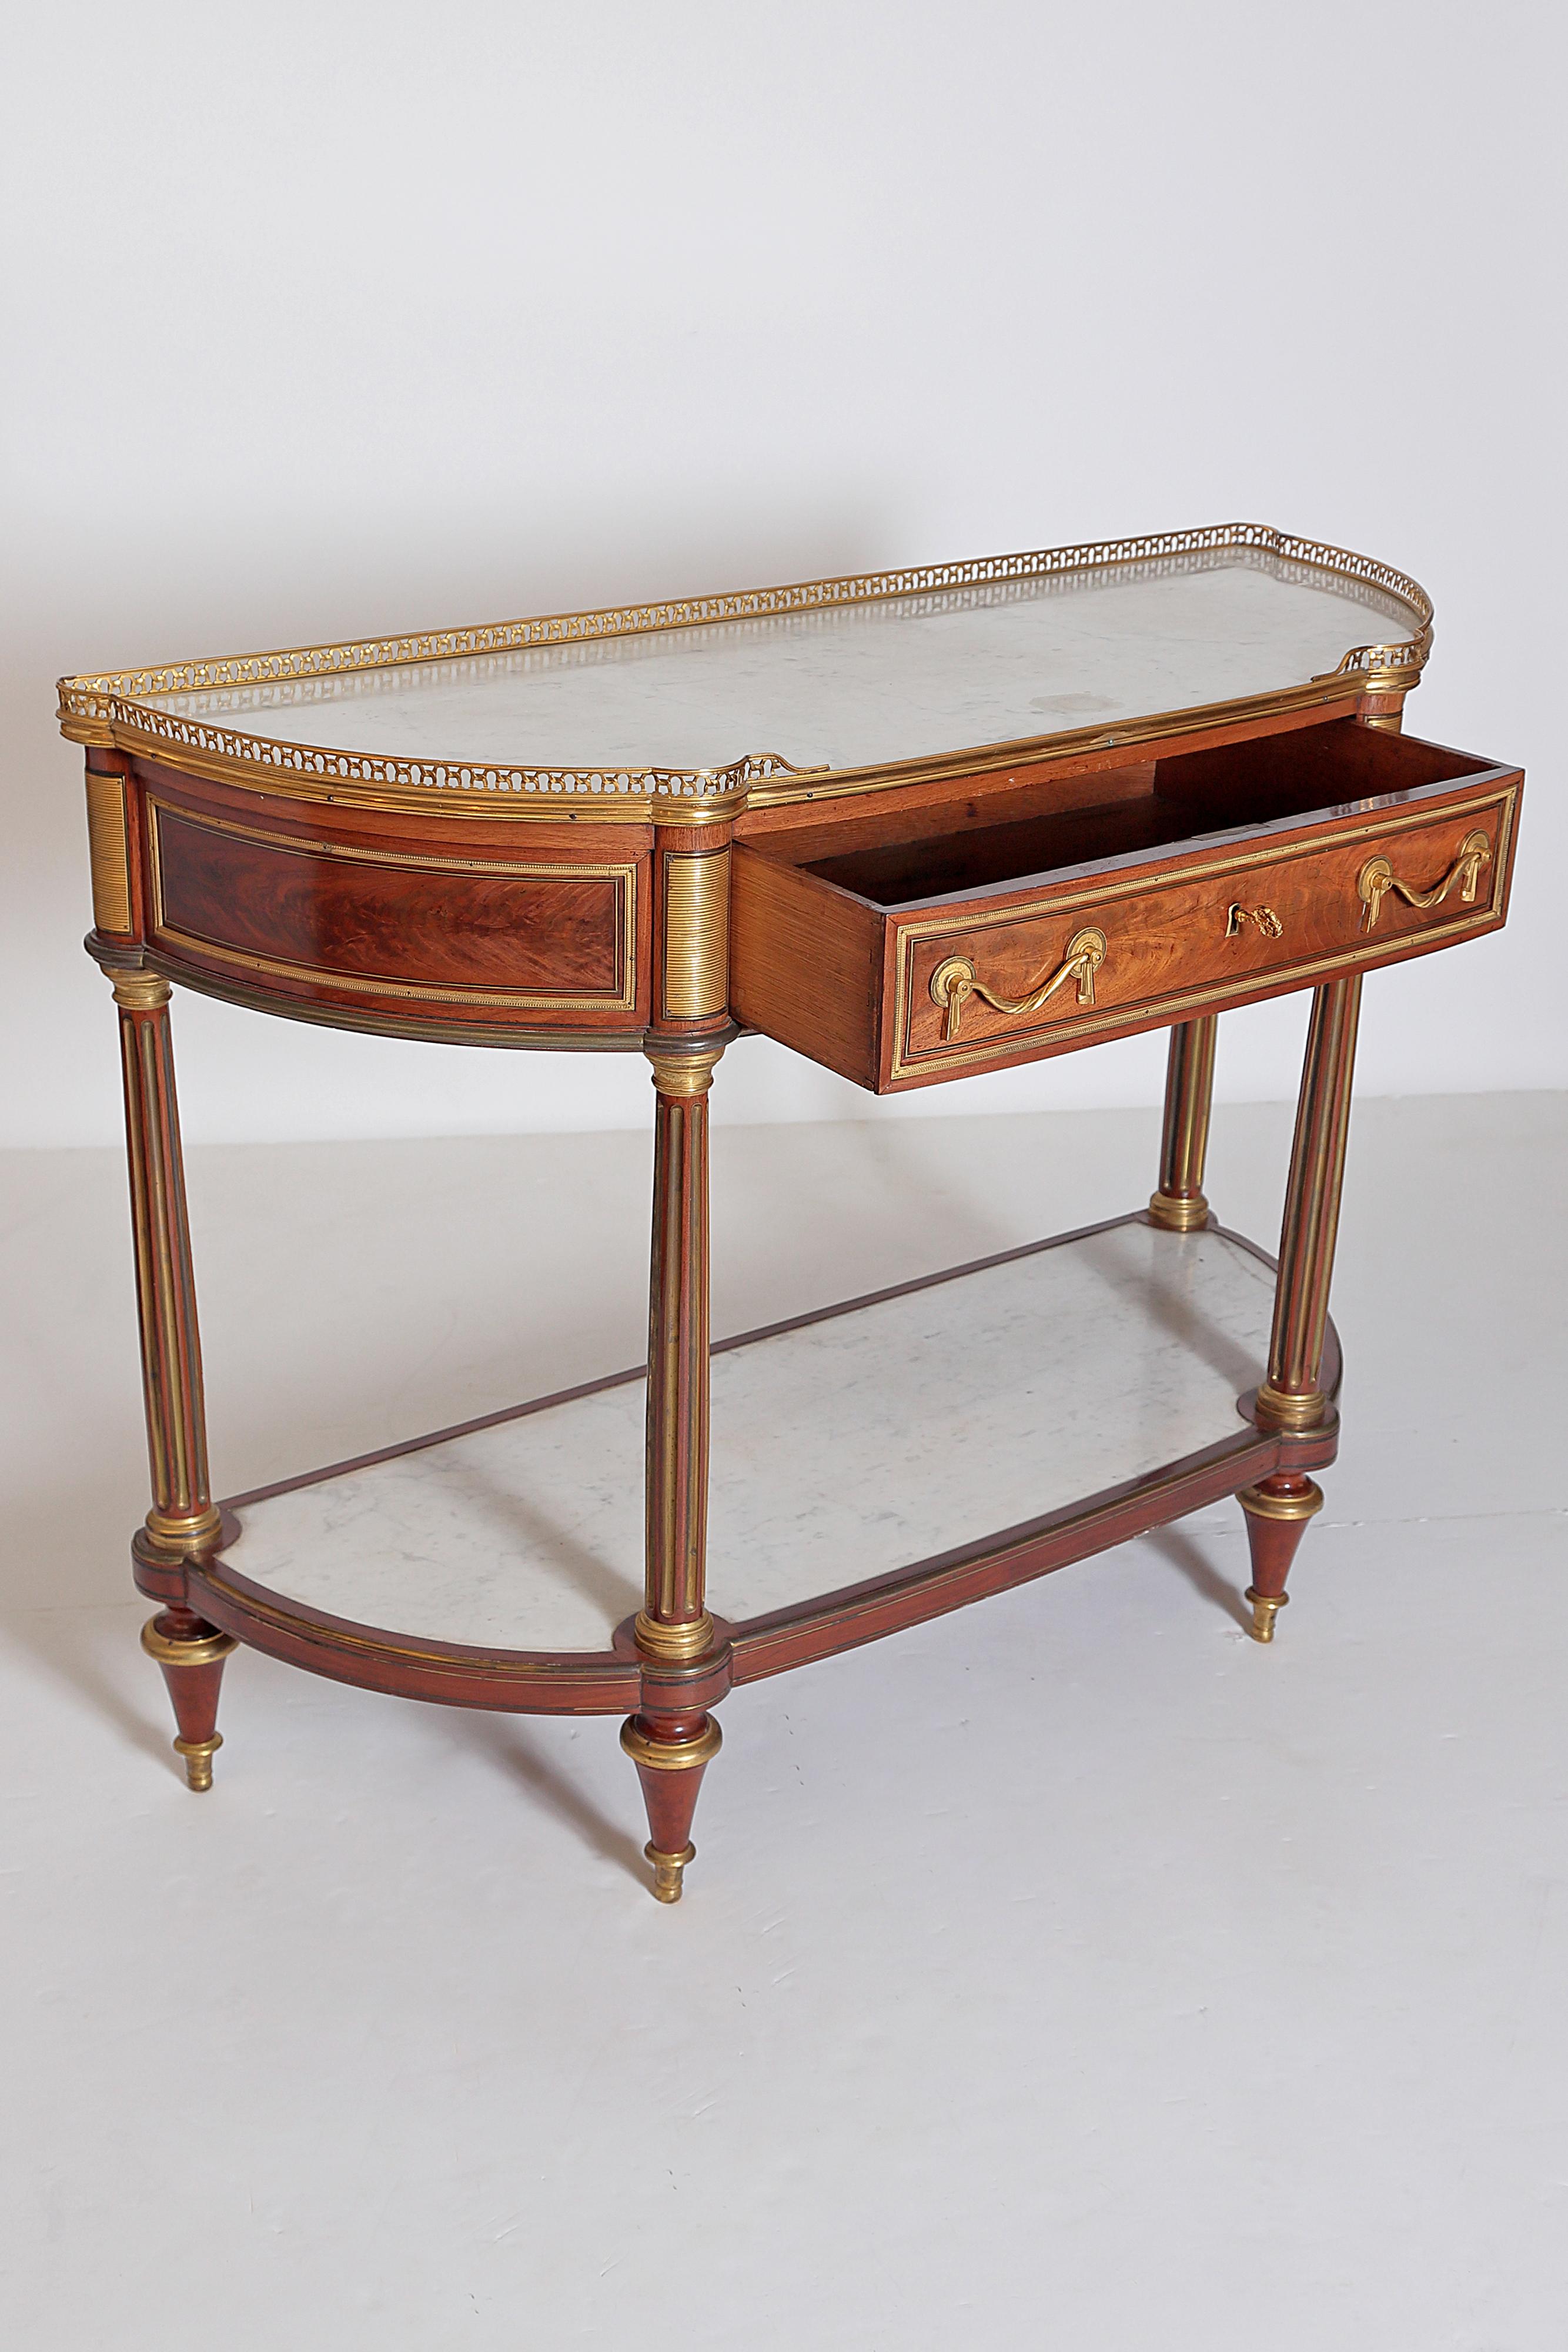 Louis XVI Mahogany, Ormolu and Marble Desserte, Signed I. PAFRAT, circa 1775 In Good Condition For Sale In Dallas, TX